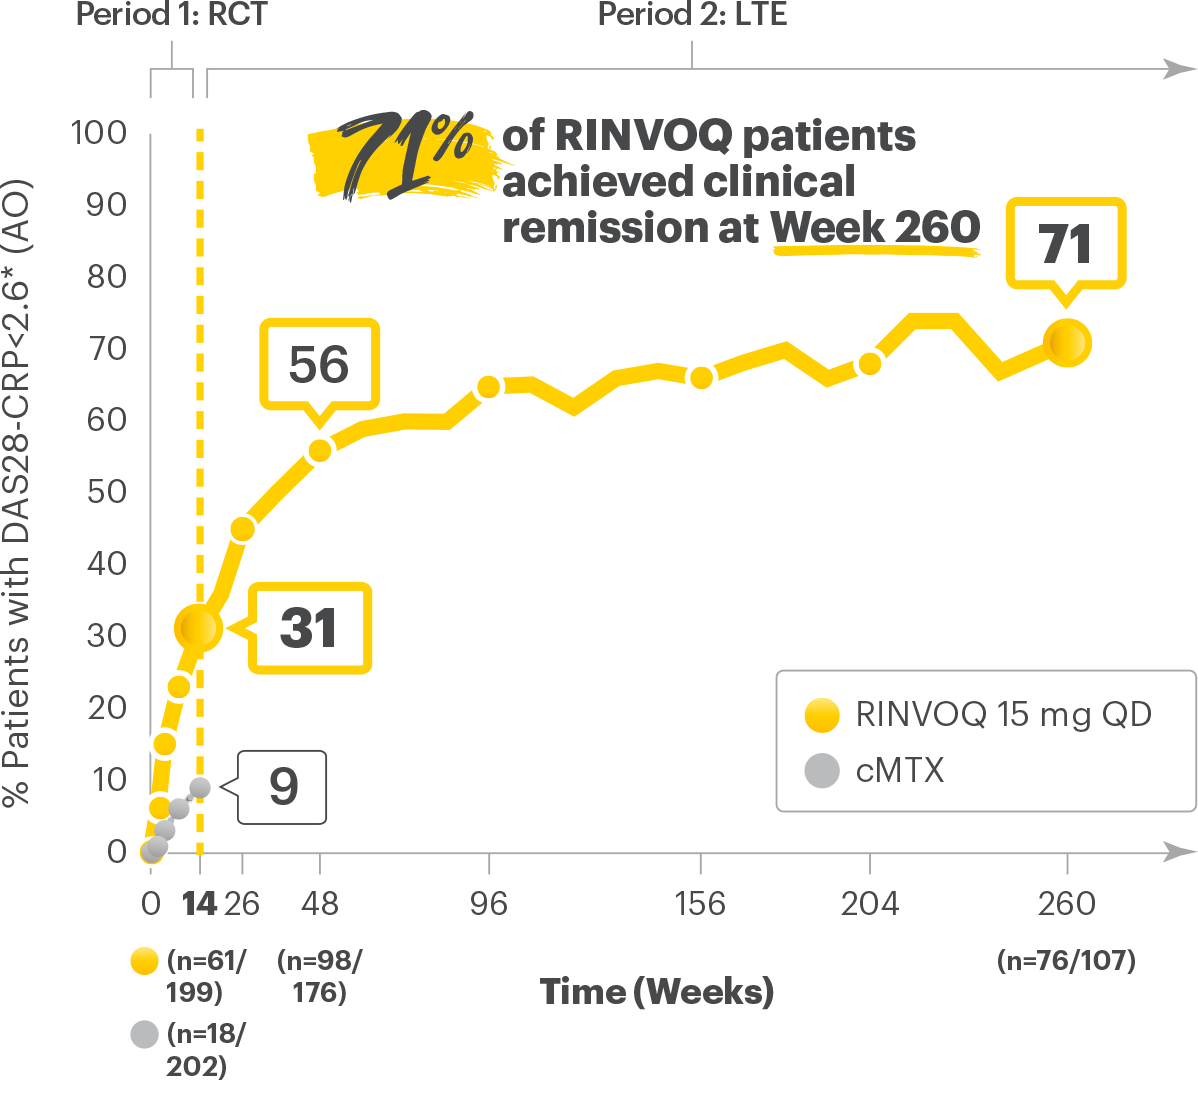 SELECT-MONOTHERAPY: DAS28-CRP≤2.6 RINVOQ vs cMTX up to Week 260 (AO)